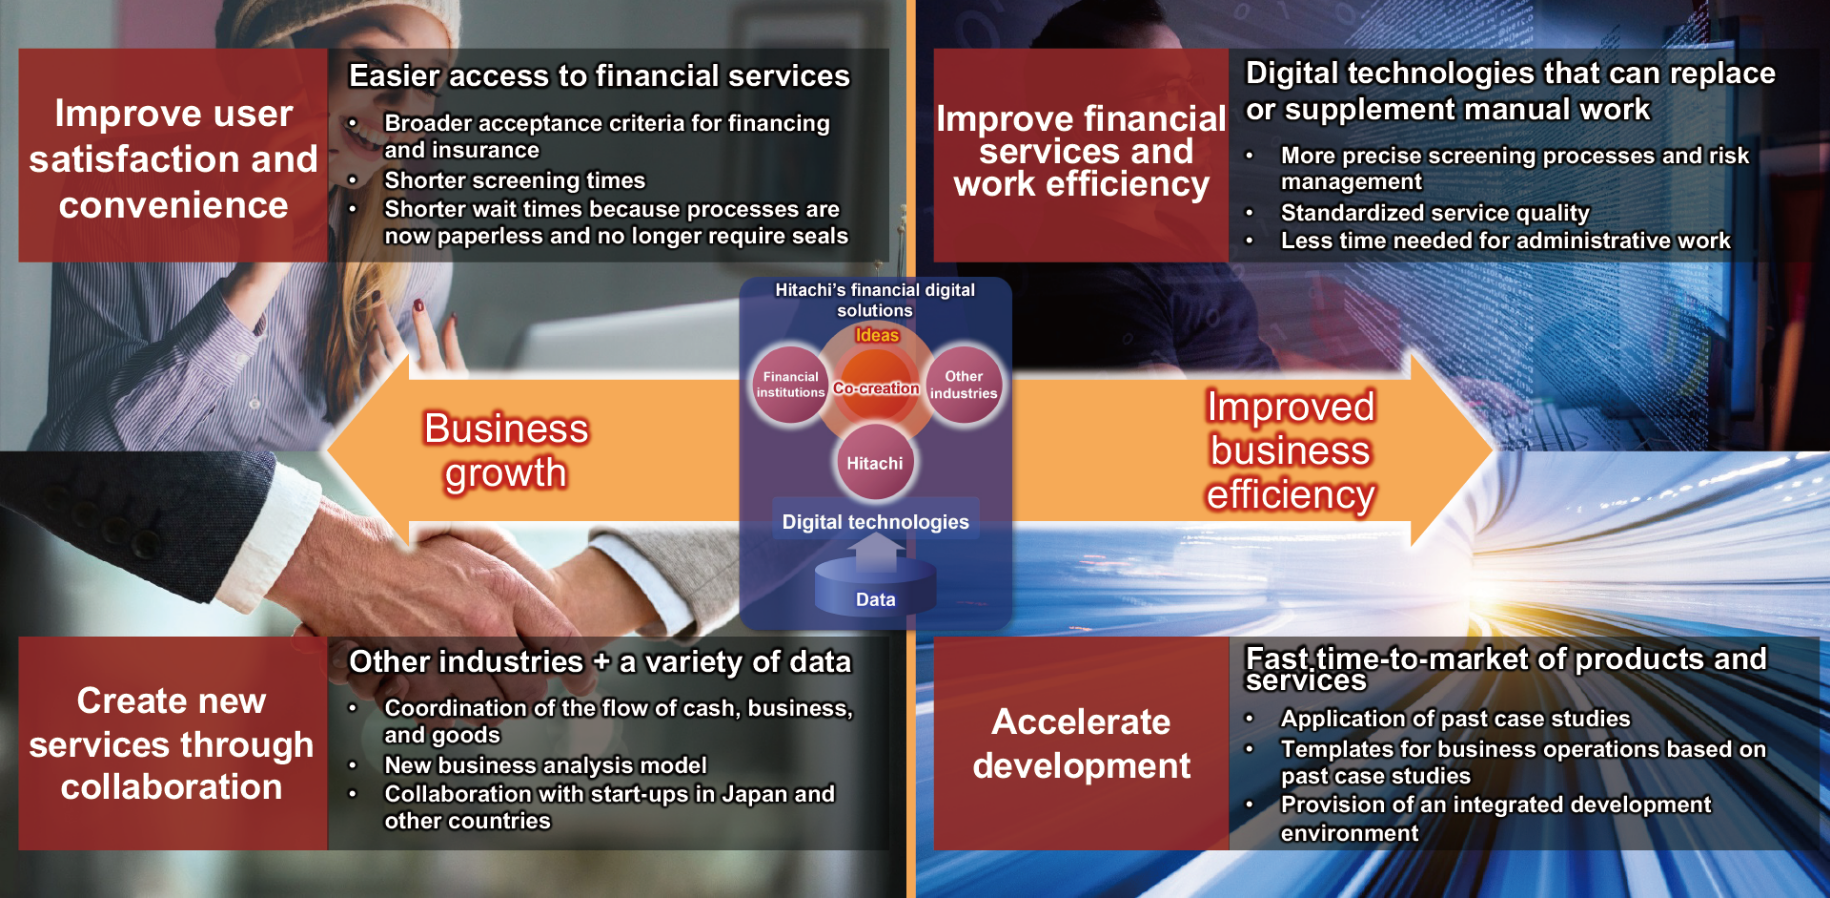 Hitachi’s financial digital solutions provides value in a variety of ways to help customers make their services more innovative.We support improving business efficiency and the business growth of financial institutions.